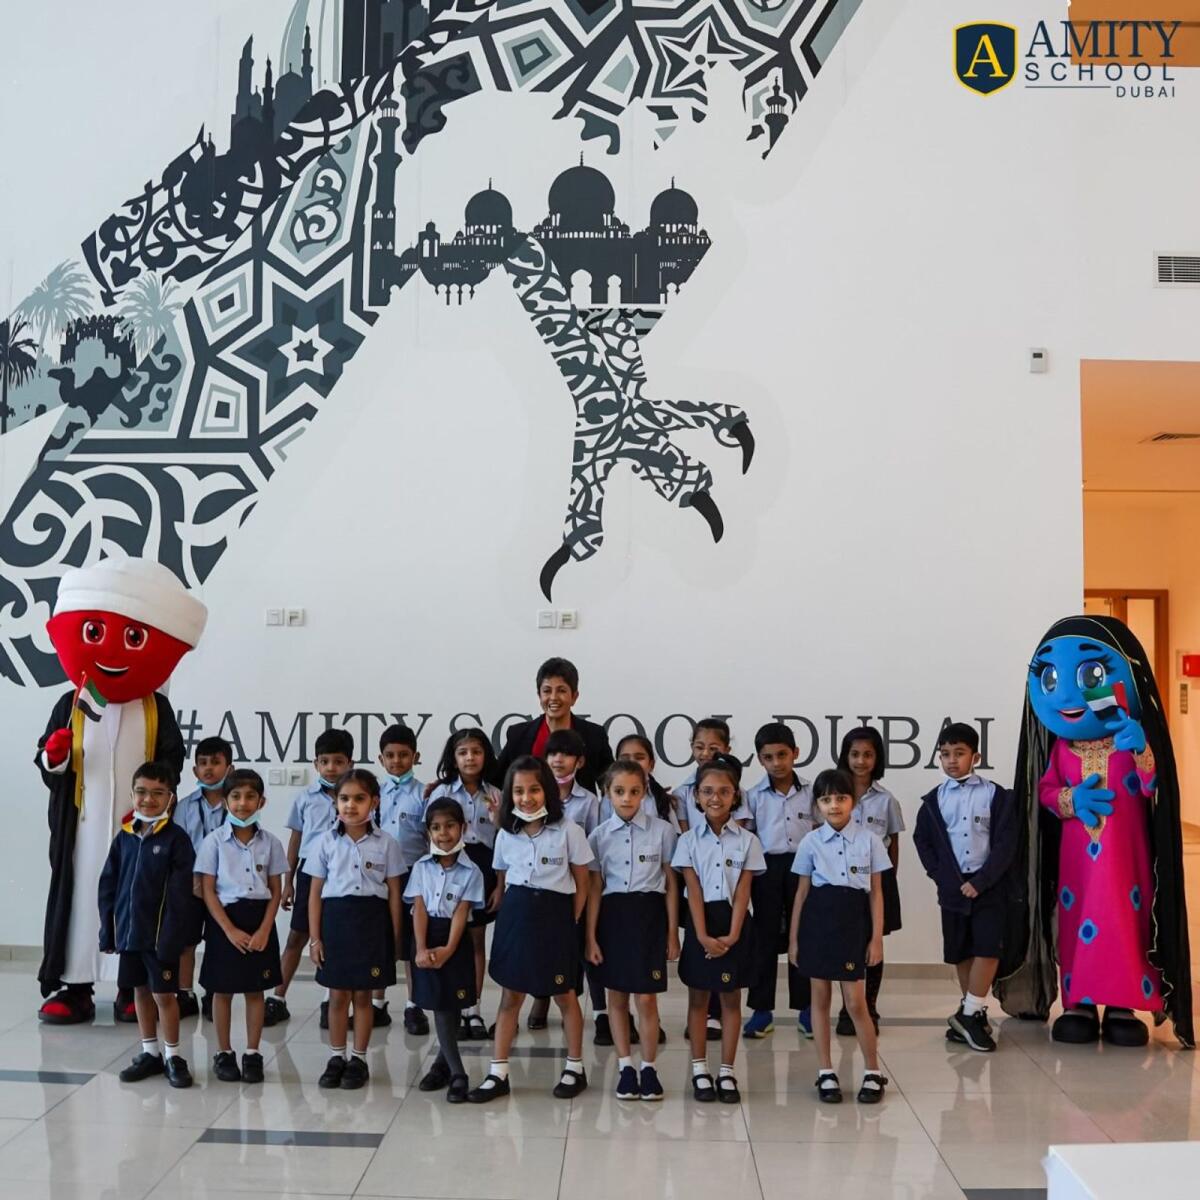 VR tours of Emirates, invitations to parents: How UAE schools are celebrating National Day